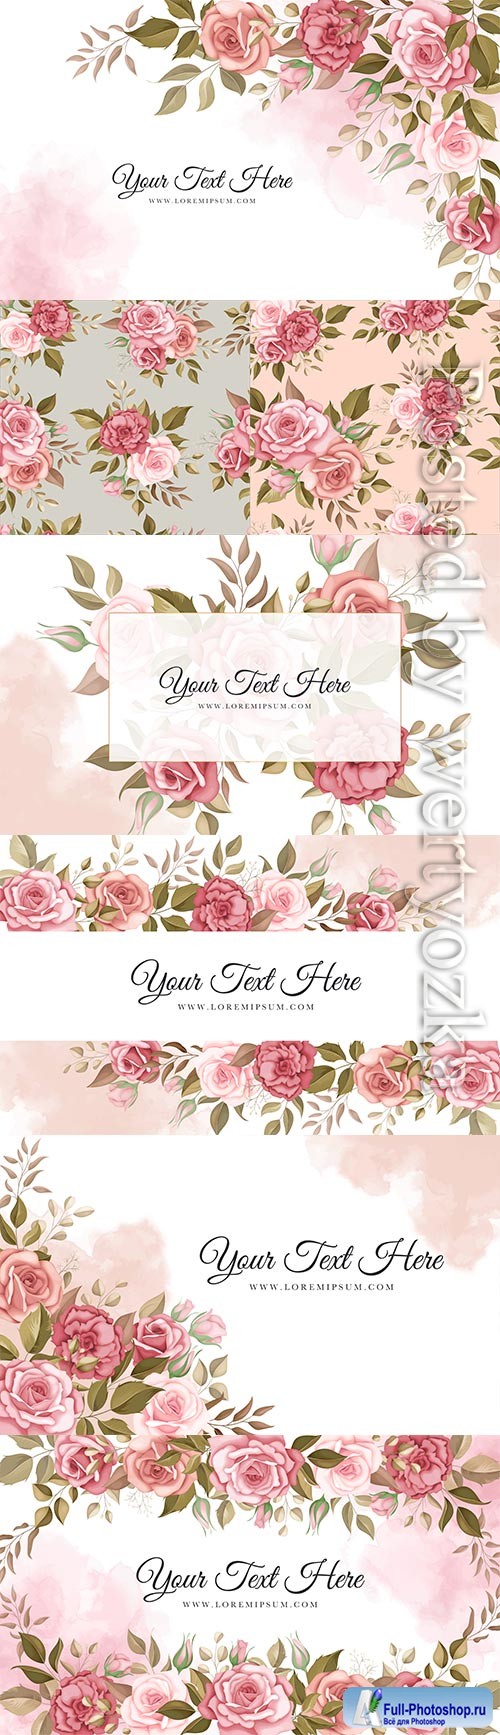 Elegant floral vector background with romantic roses